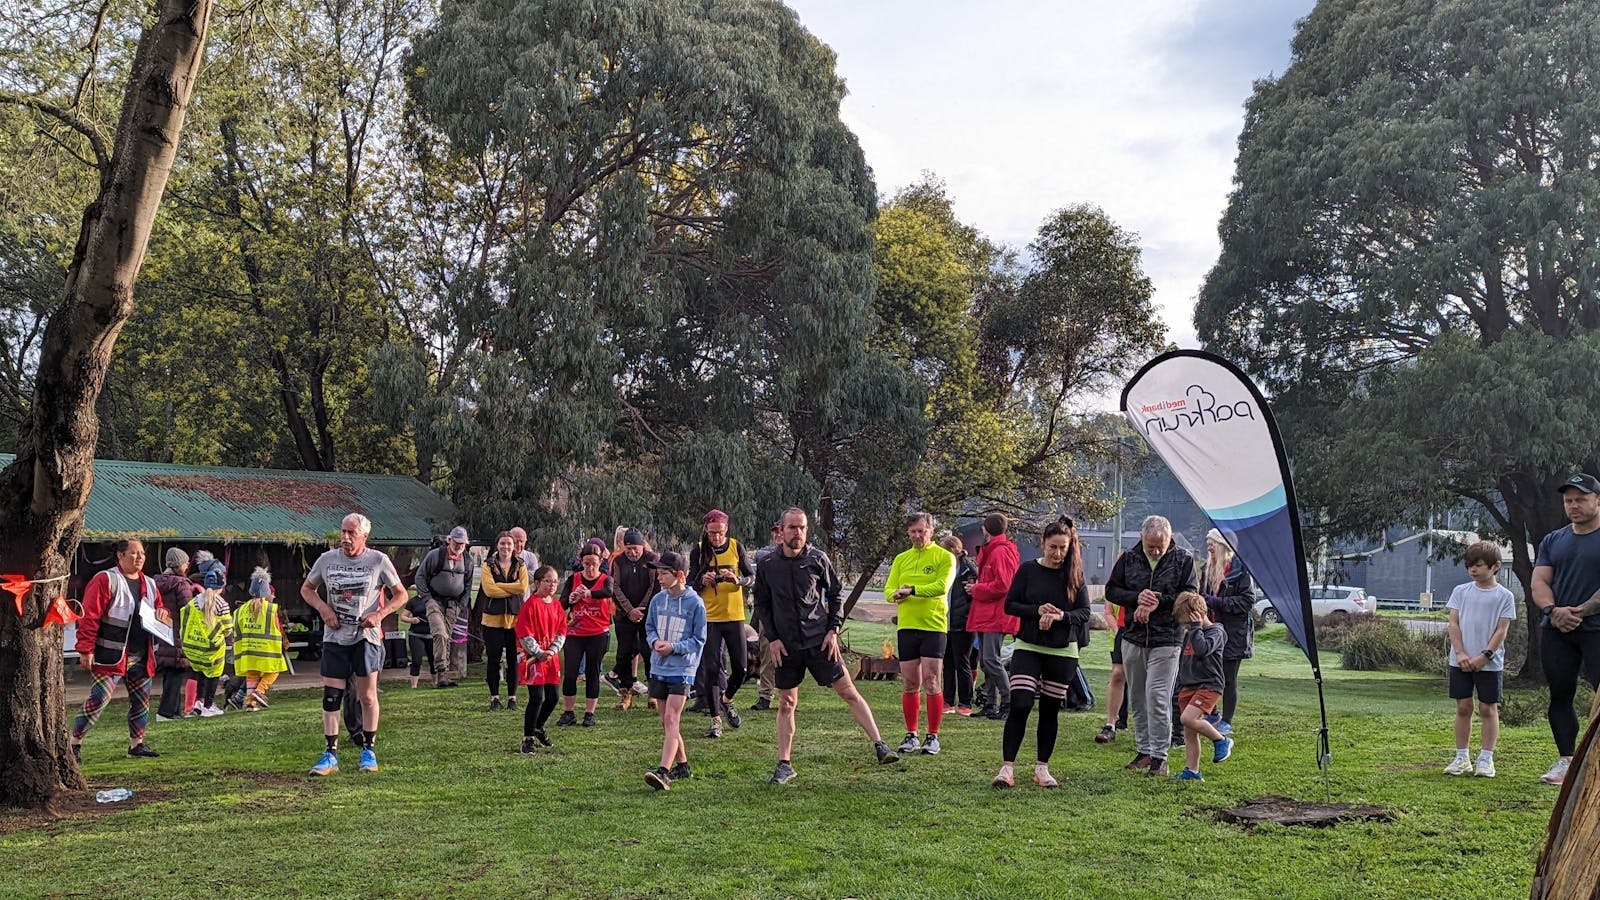 The starting bell rings at Geeveston parkrun's 5th birthday